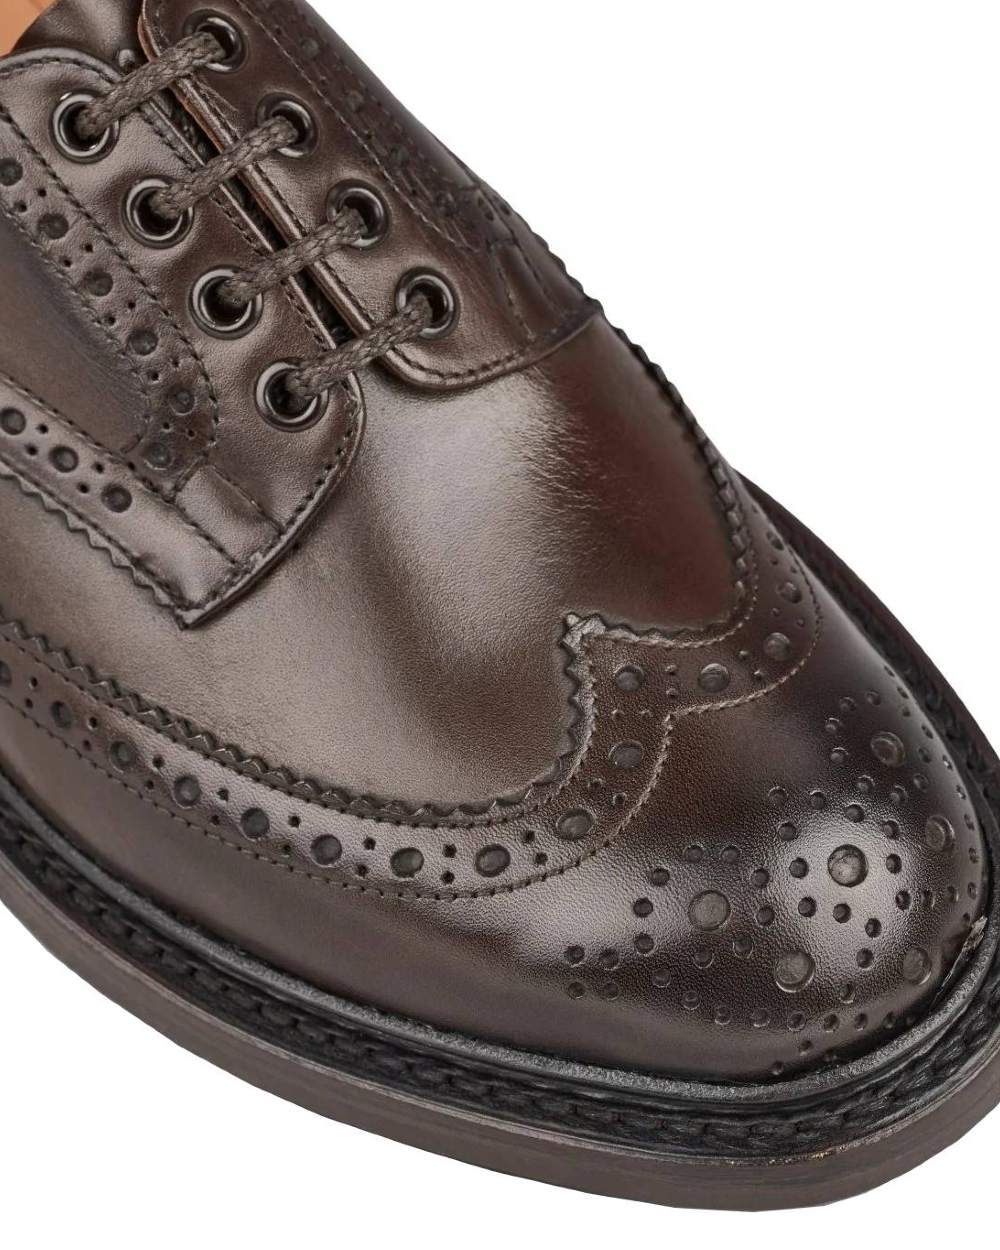 Espresso Burnished Coloured Trickers Bourton Country Shoe On A White Background 